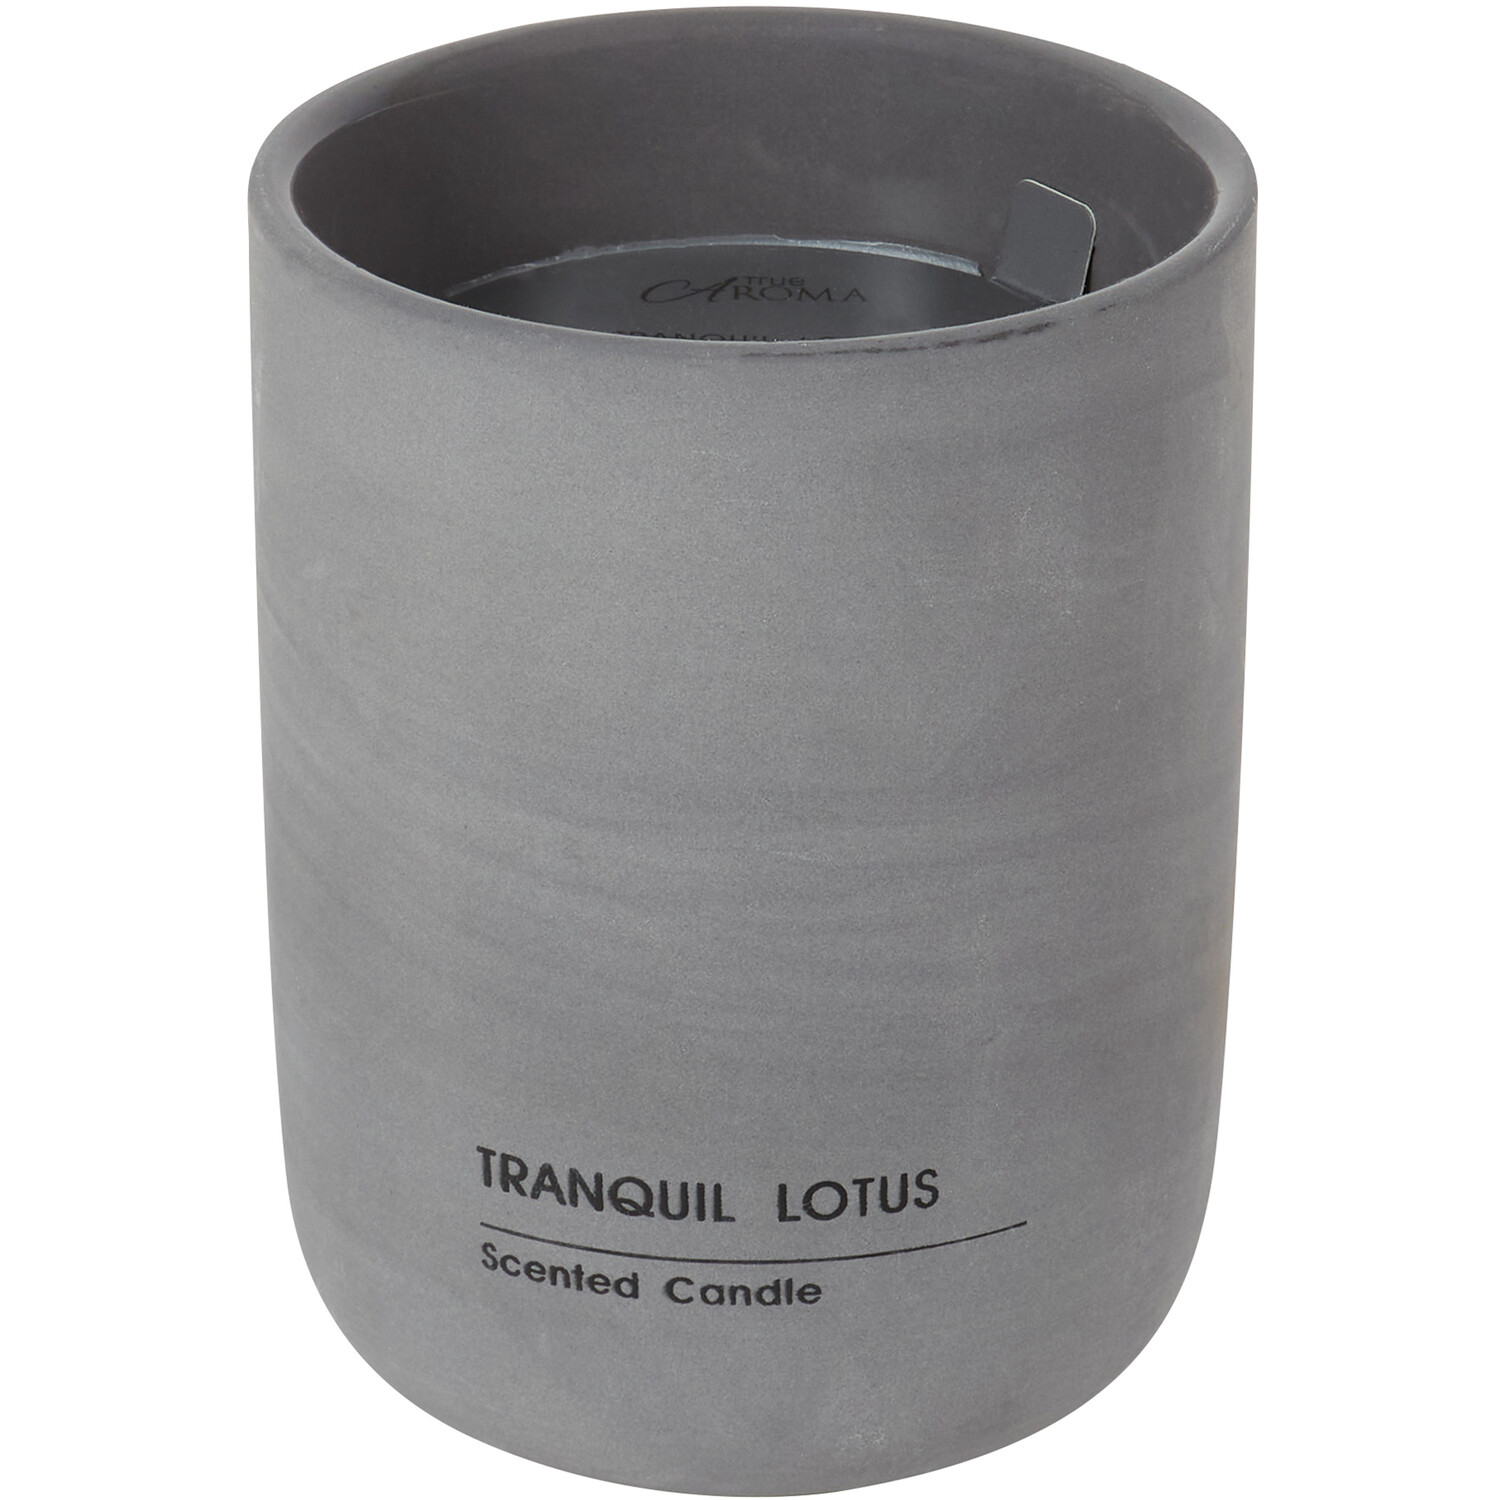 Tranquil Lotus Candle - Grey Image 2